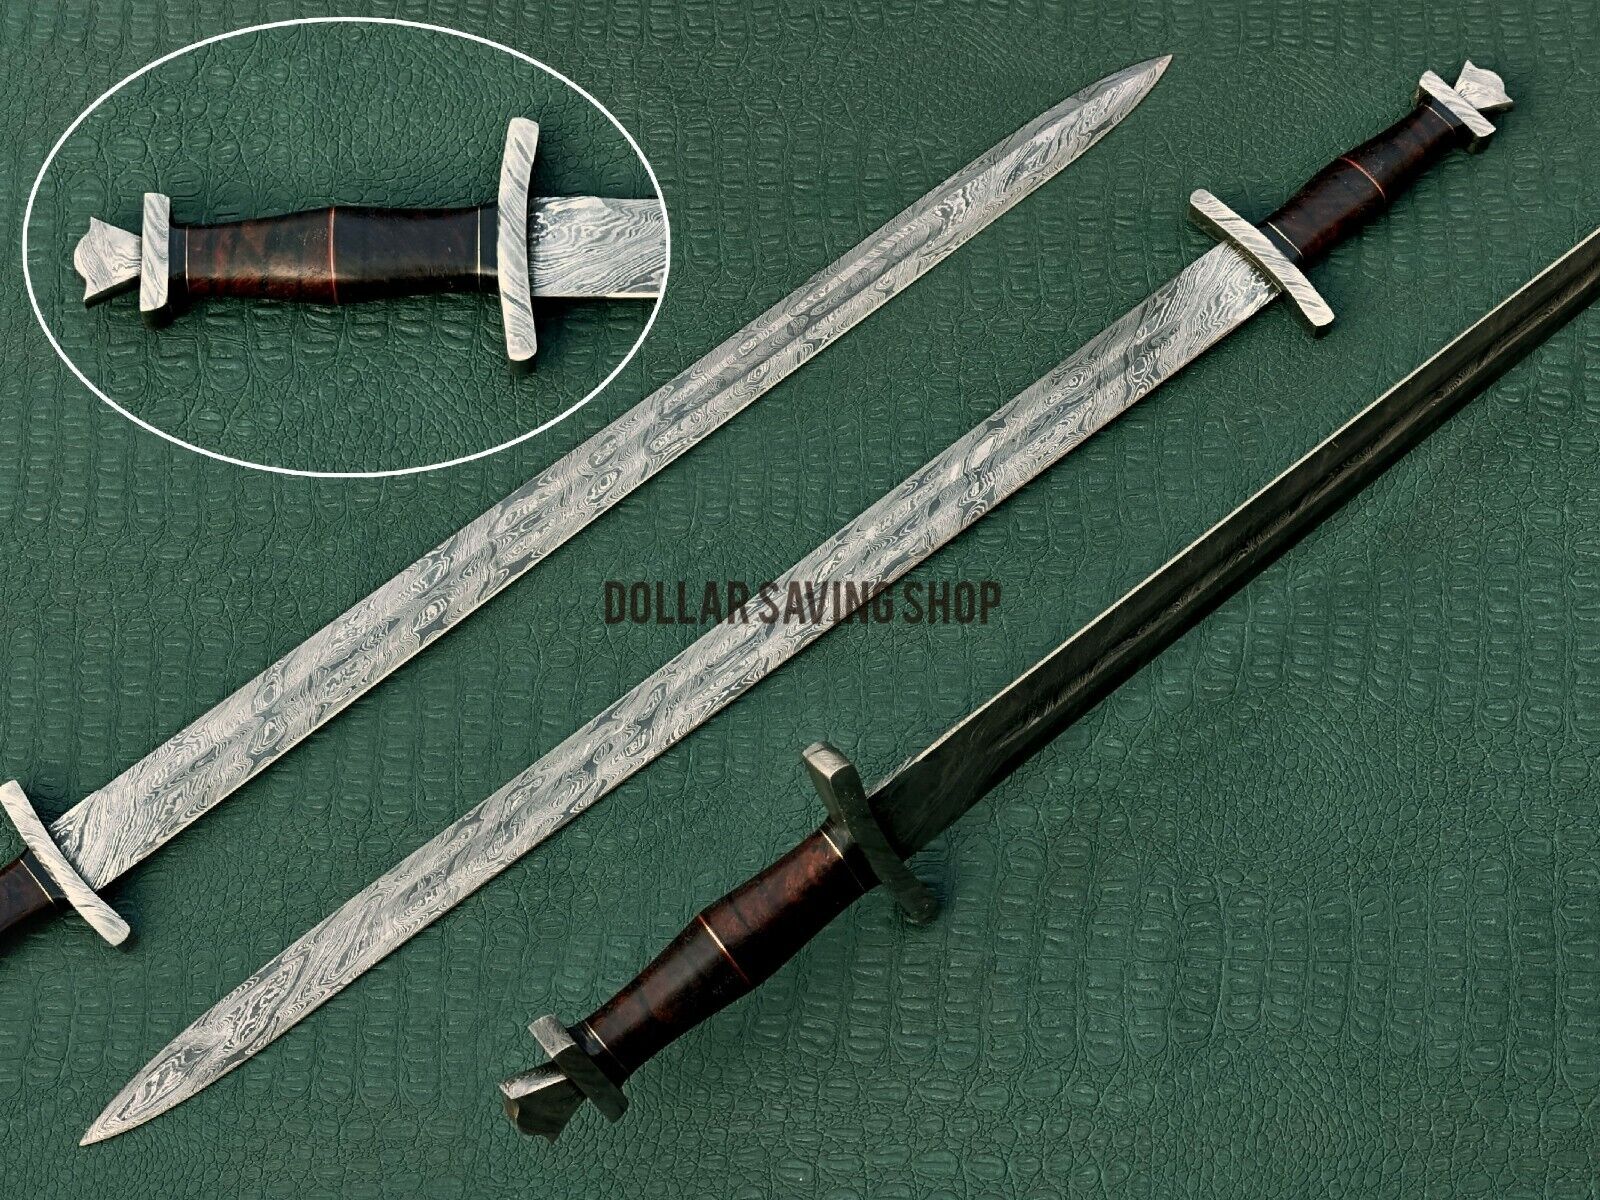 Fully Hand Forged Damascus Steel Norse / Medieval / Viking / Historical Sword.